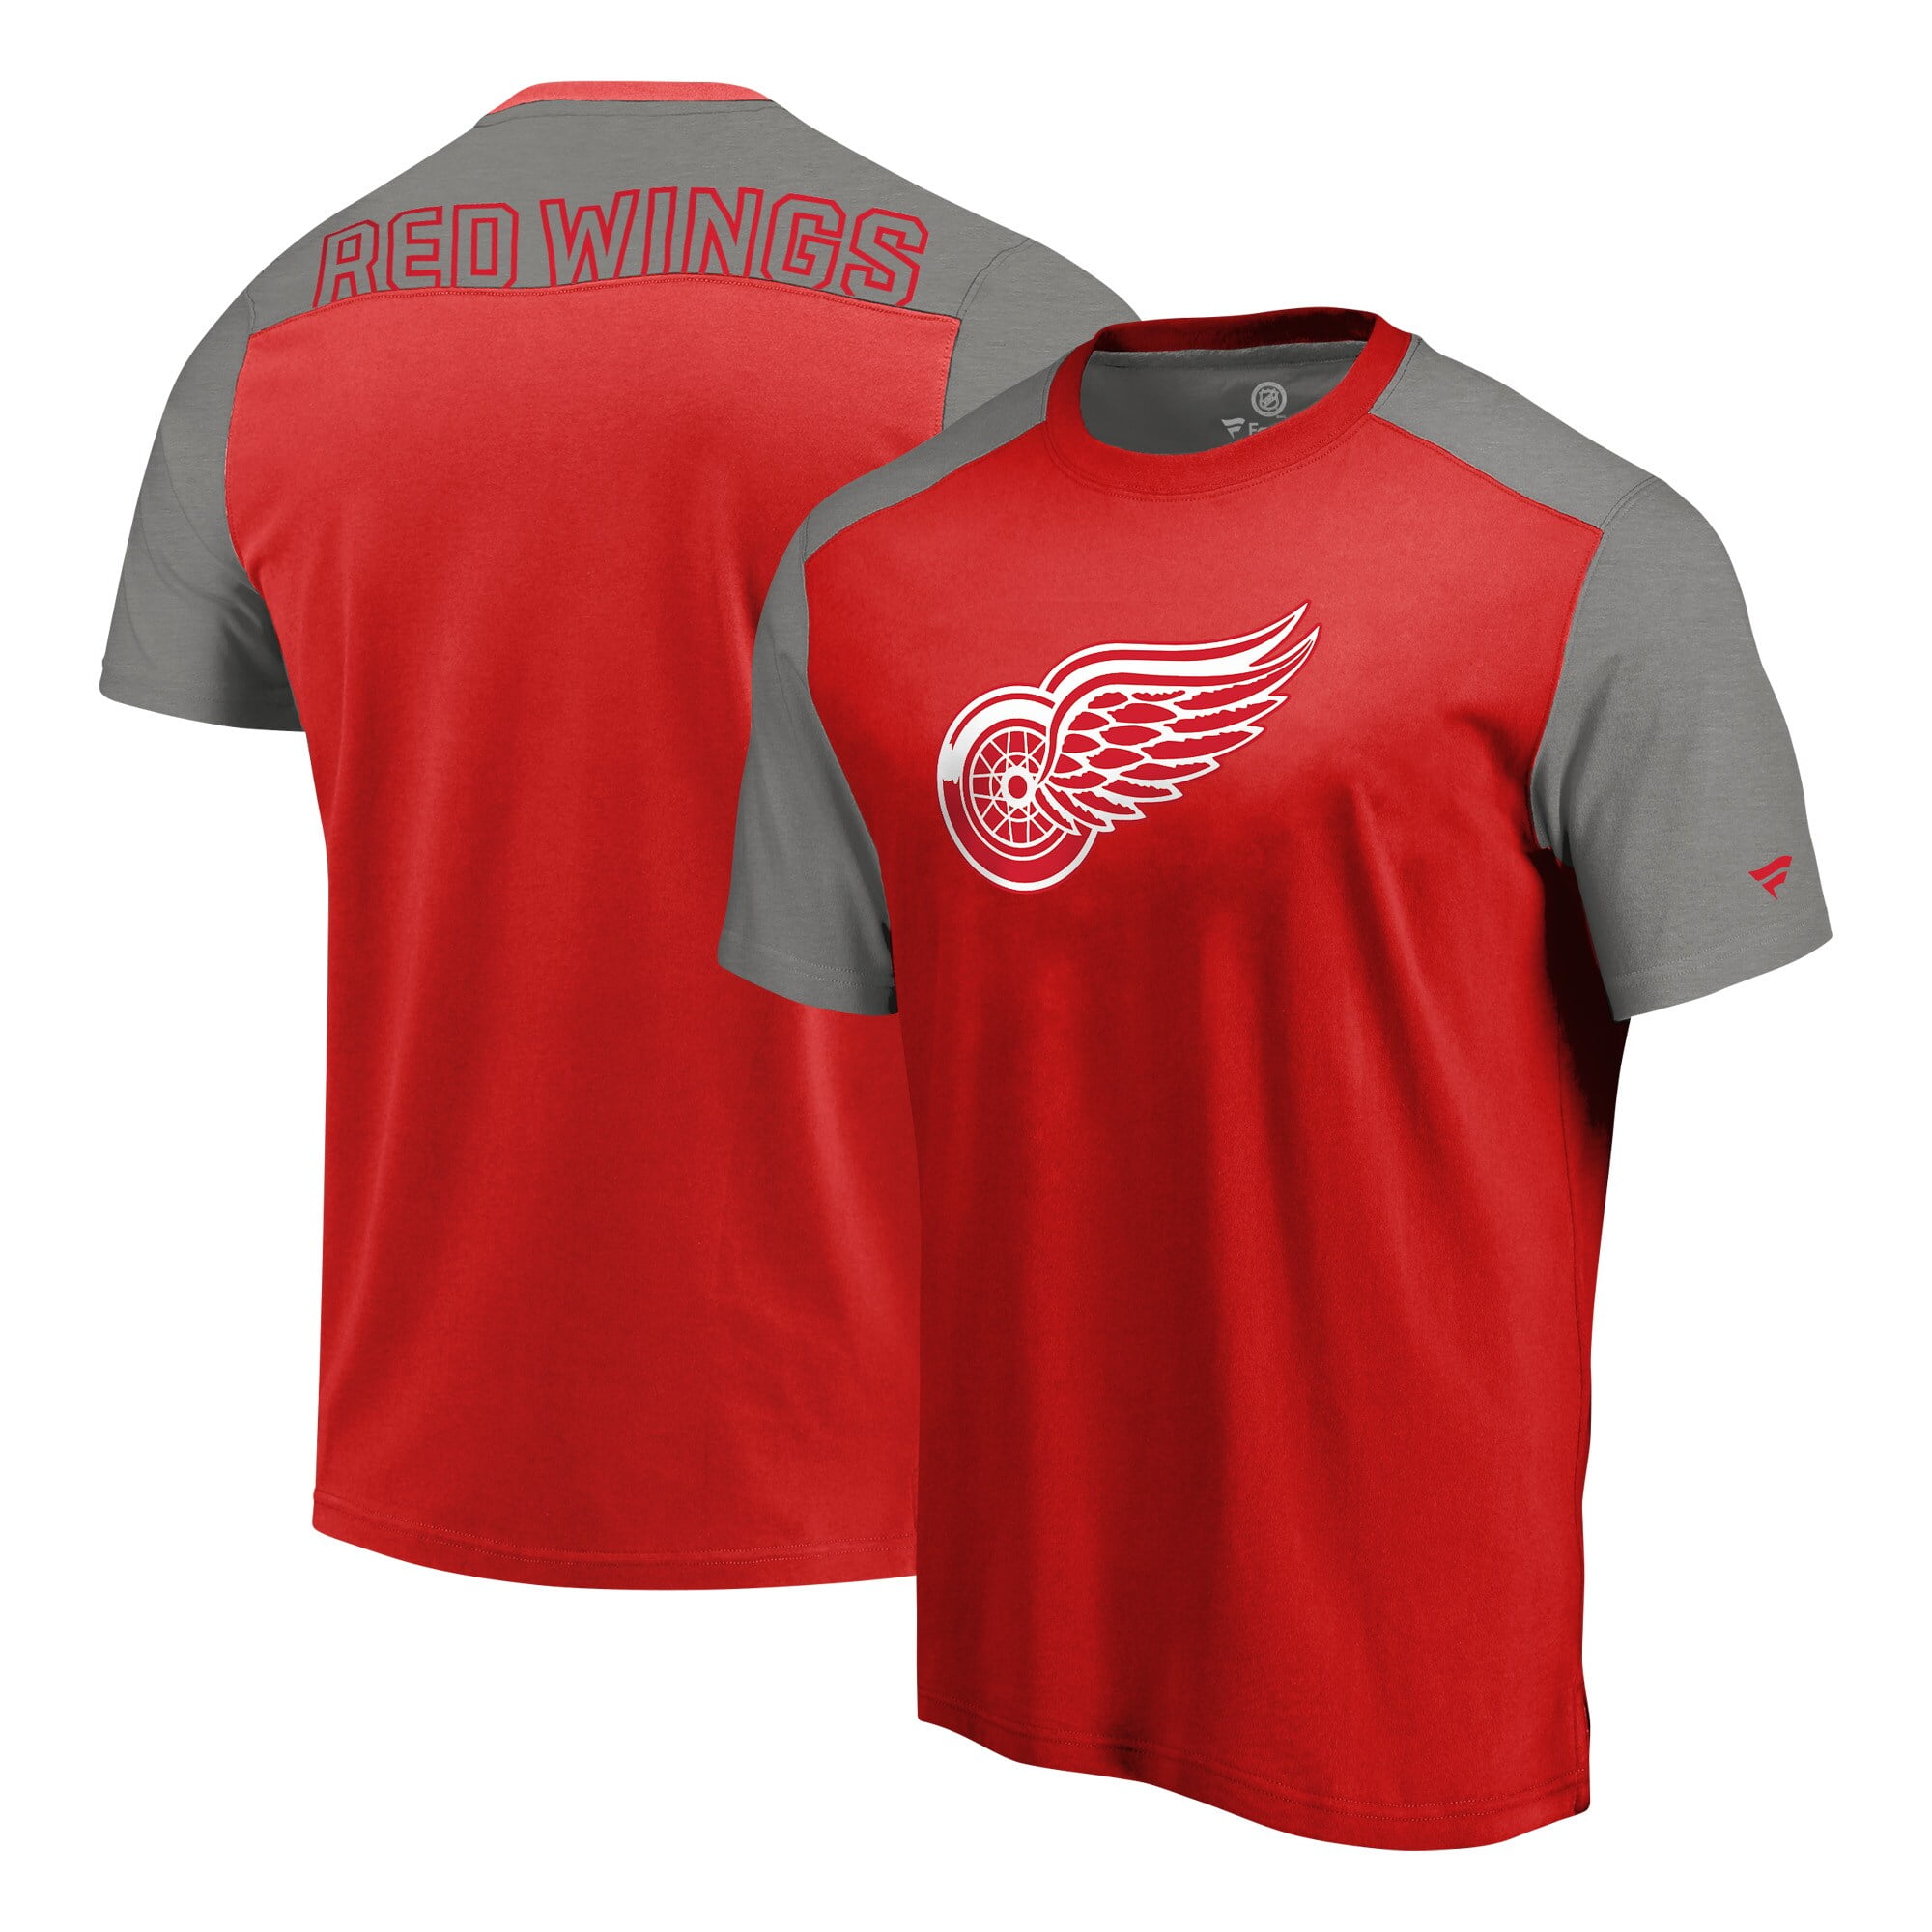 Fanatics - Detroit Red Wings Fanatics Branded Iconic Blocked T-Shirt - Red/Heathered Gray